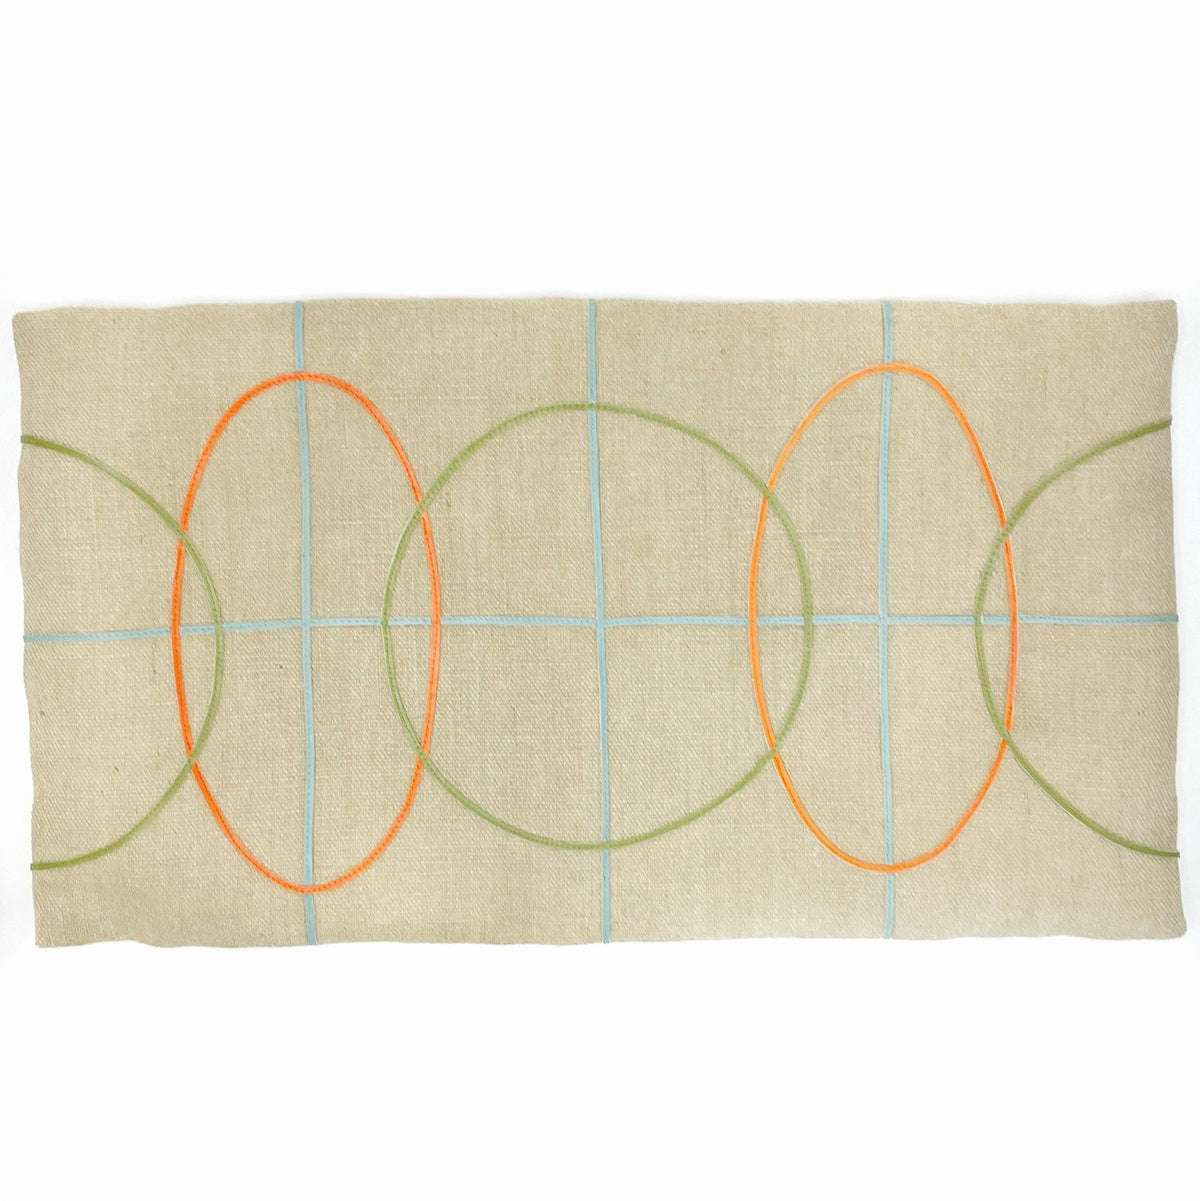 Pillow Cover 21x12 - Tan - Mid Century Geometric Ovals/Circles - Gift & Gather